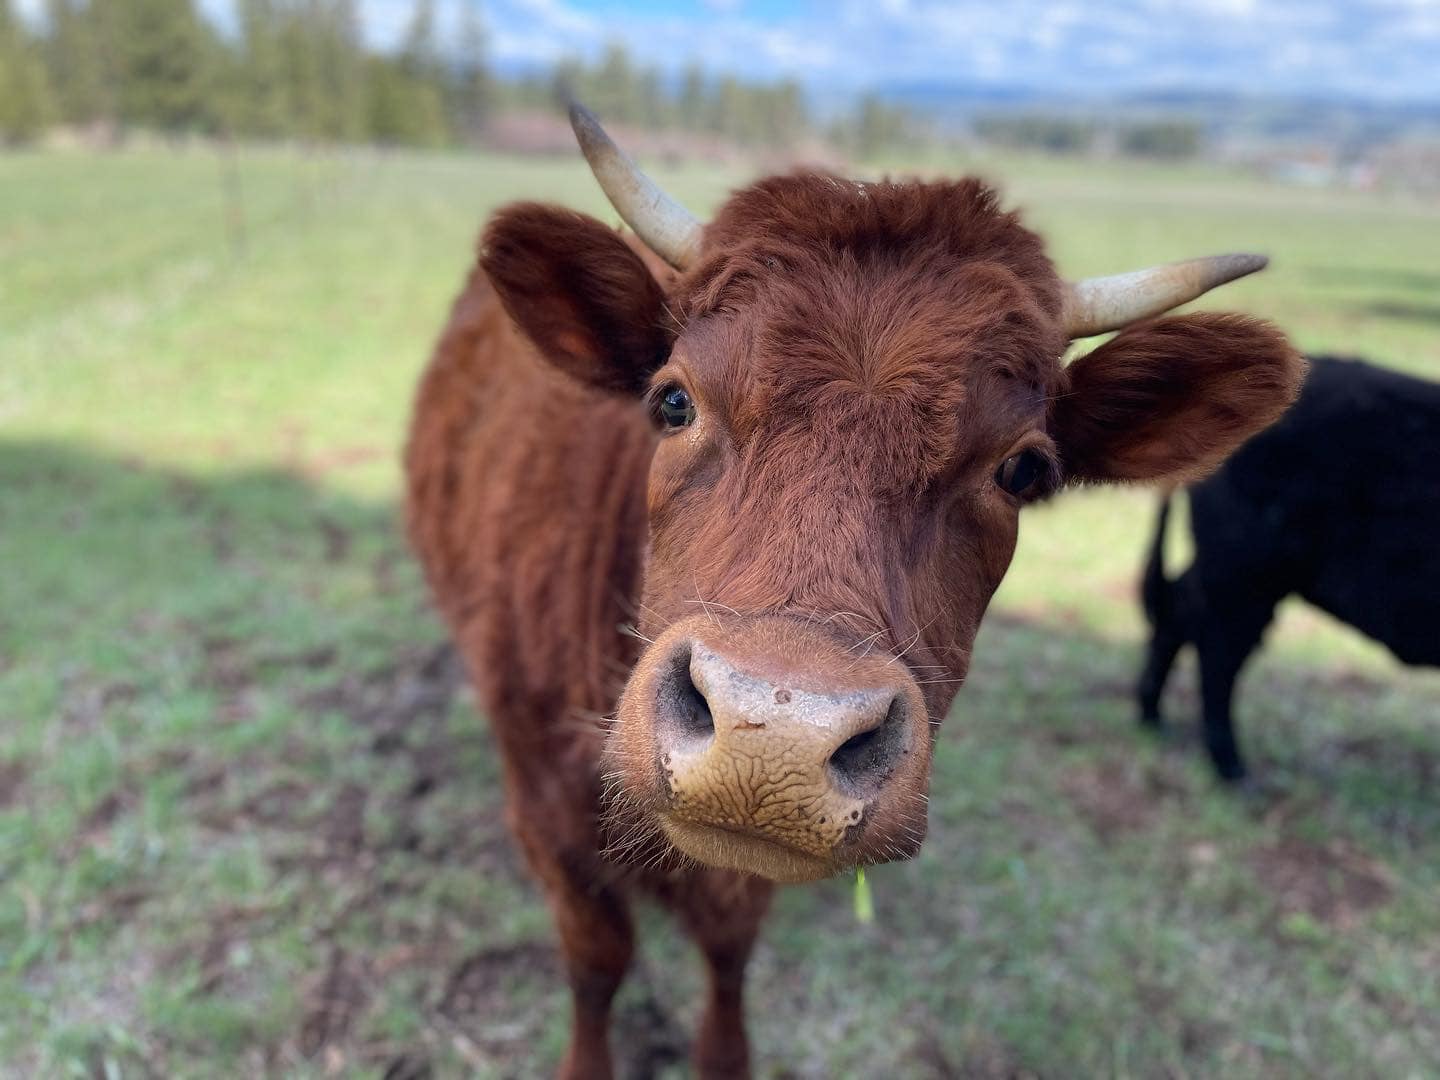 cow standing in field looking directly into camera